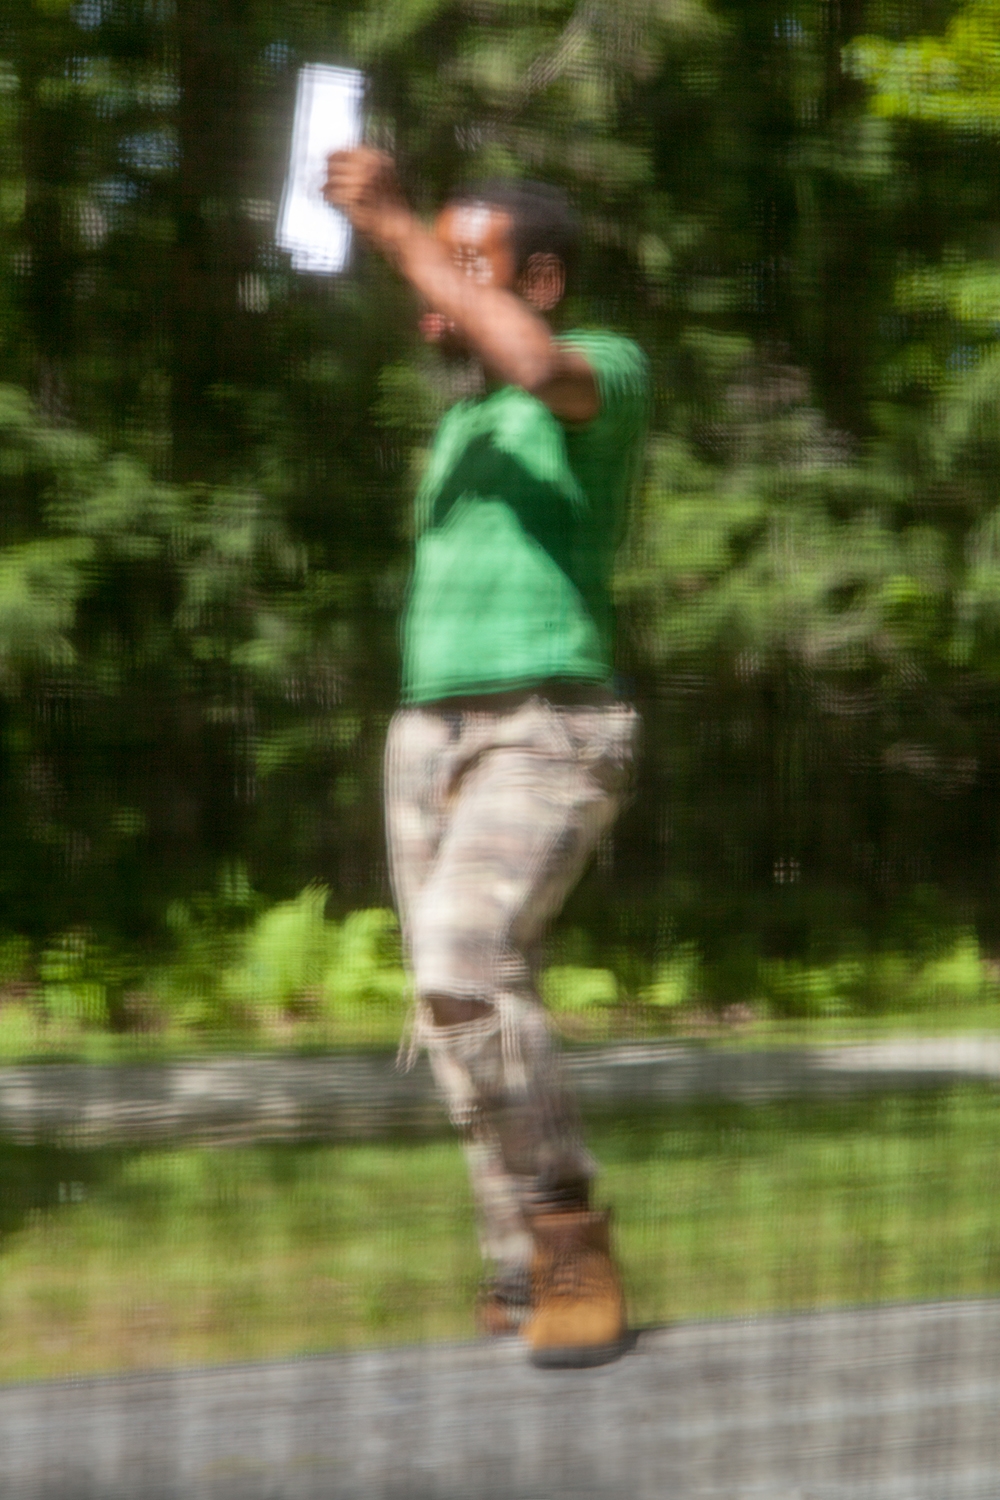 A blurred photograph of a man outdoors